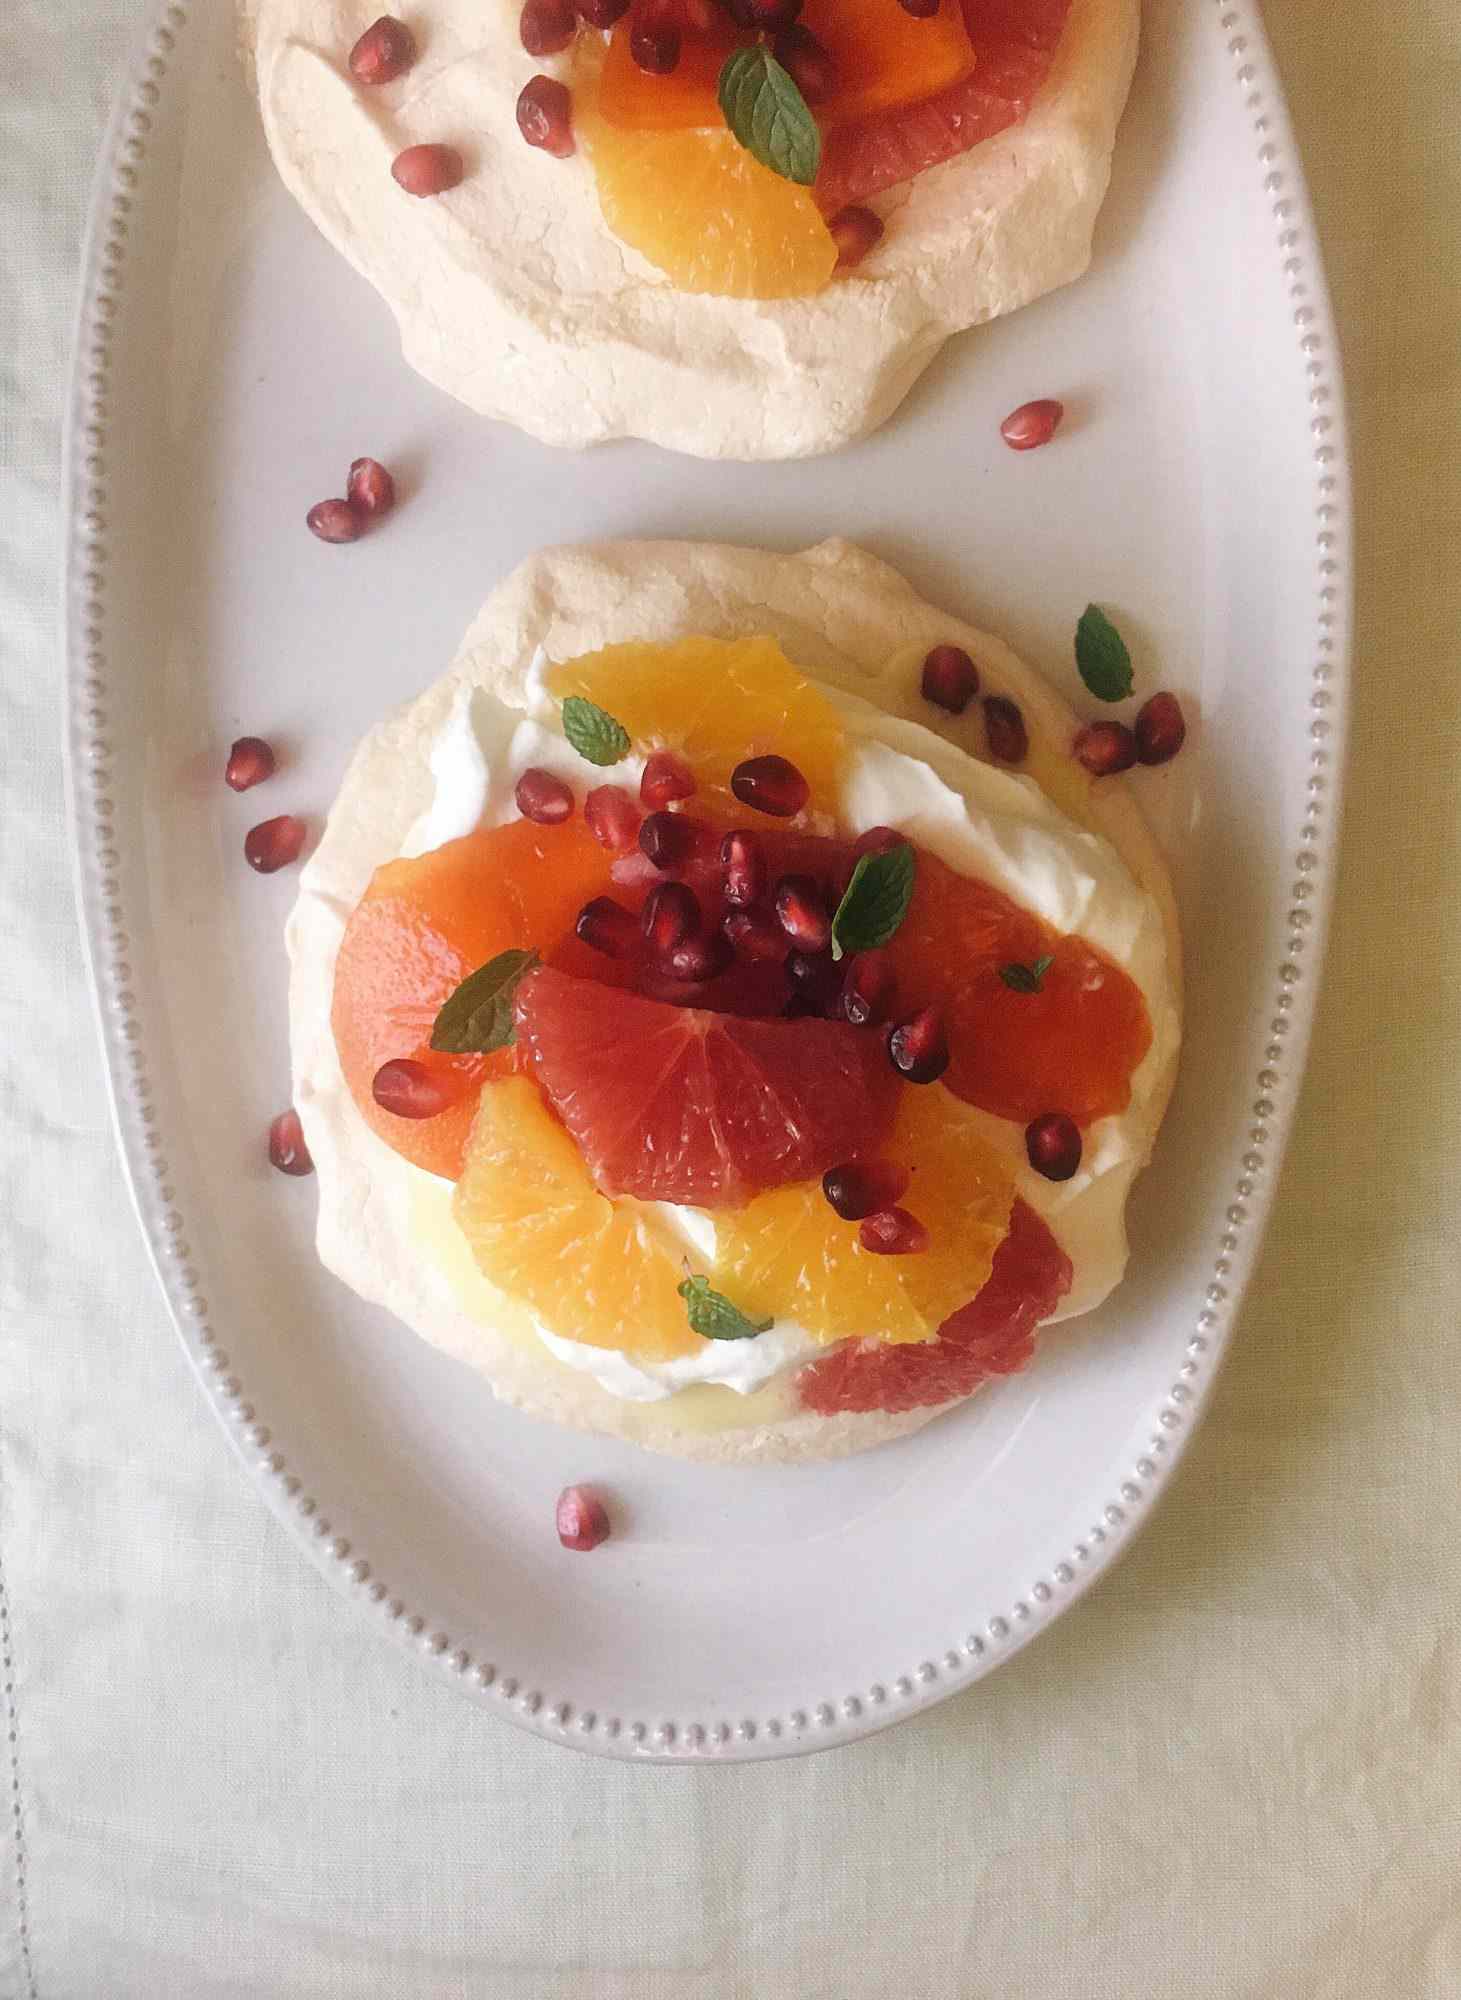 pavlova meringue topped with citrus fruit and pomegranate seeds